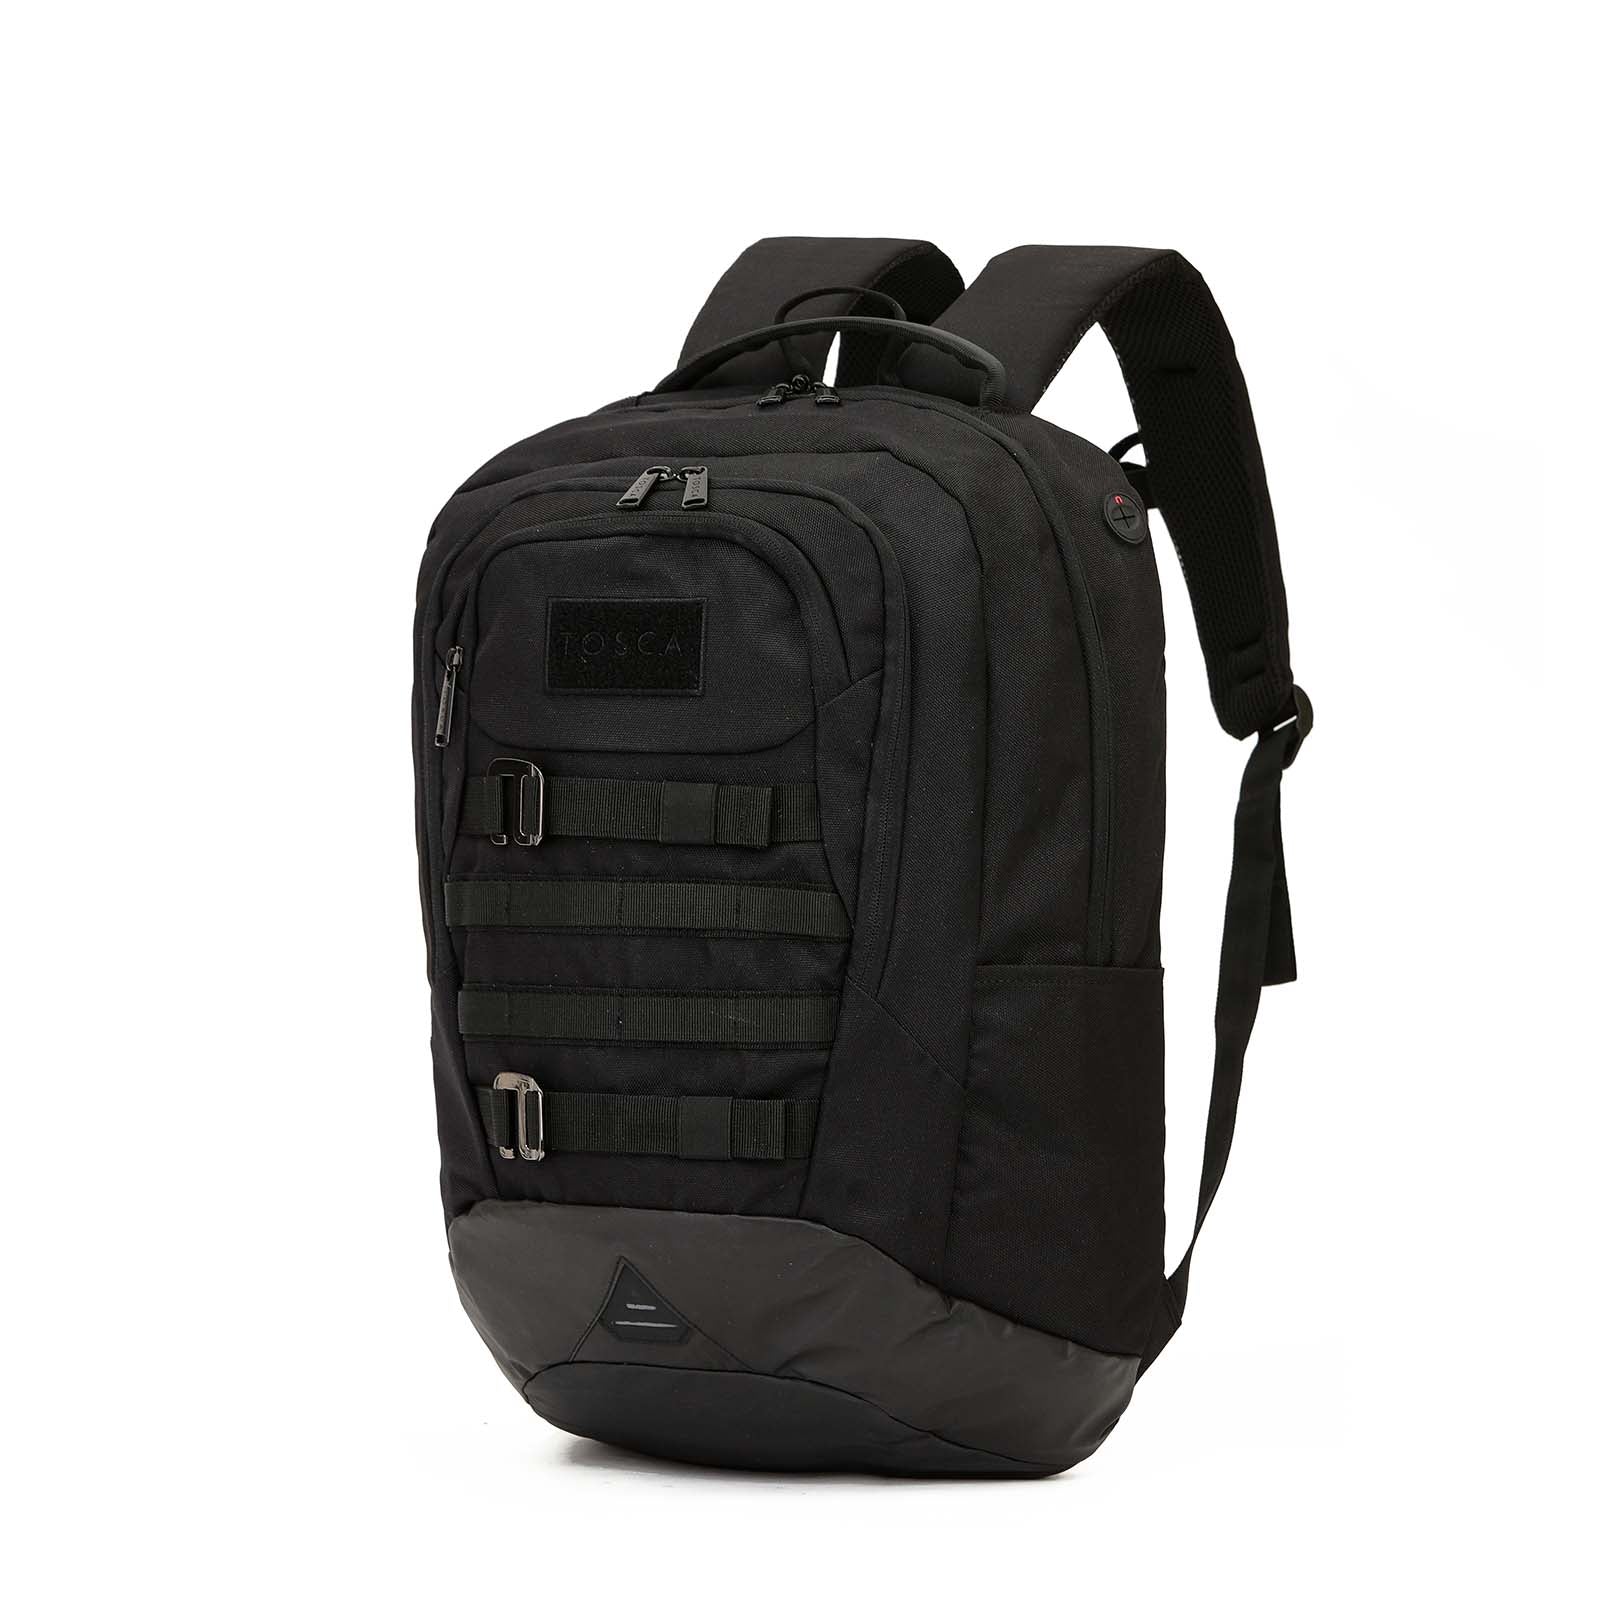    tosca-laptop-compartment-backpack-35l-black-front-angle